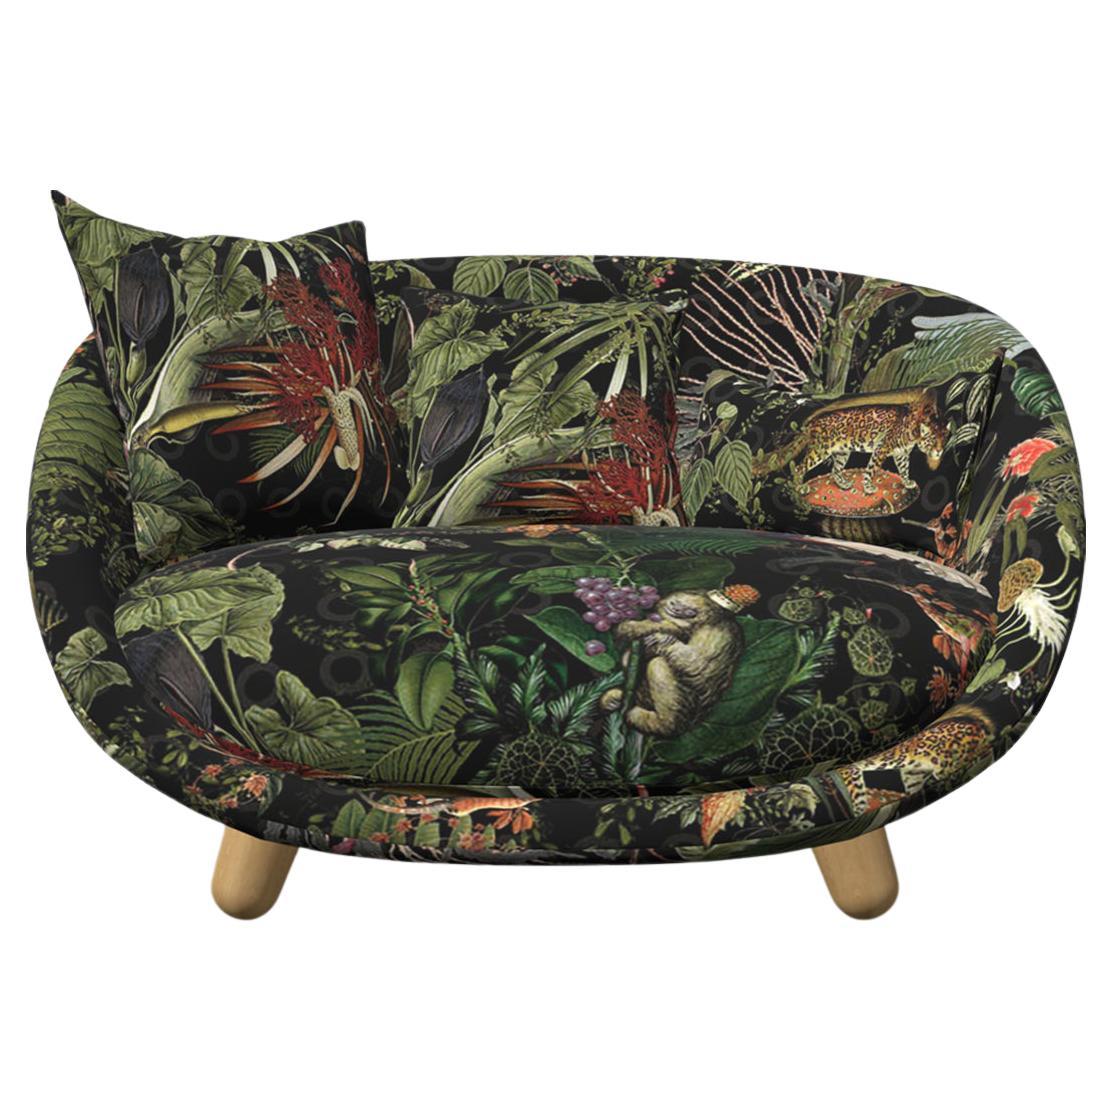 Moooi Love Sofa in The Menagerie of Extinct Animals Upholstery & White Wash Legs